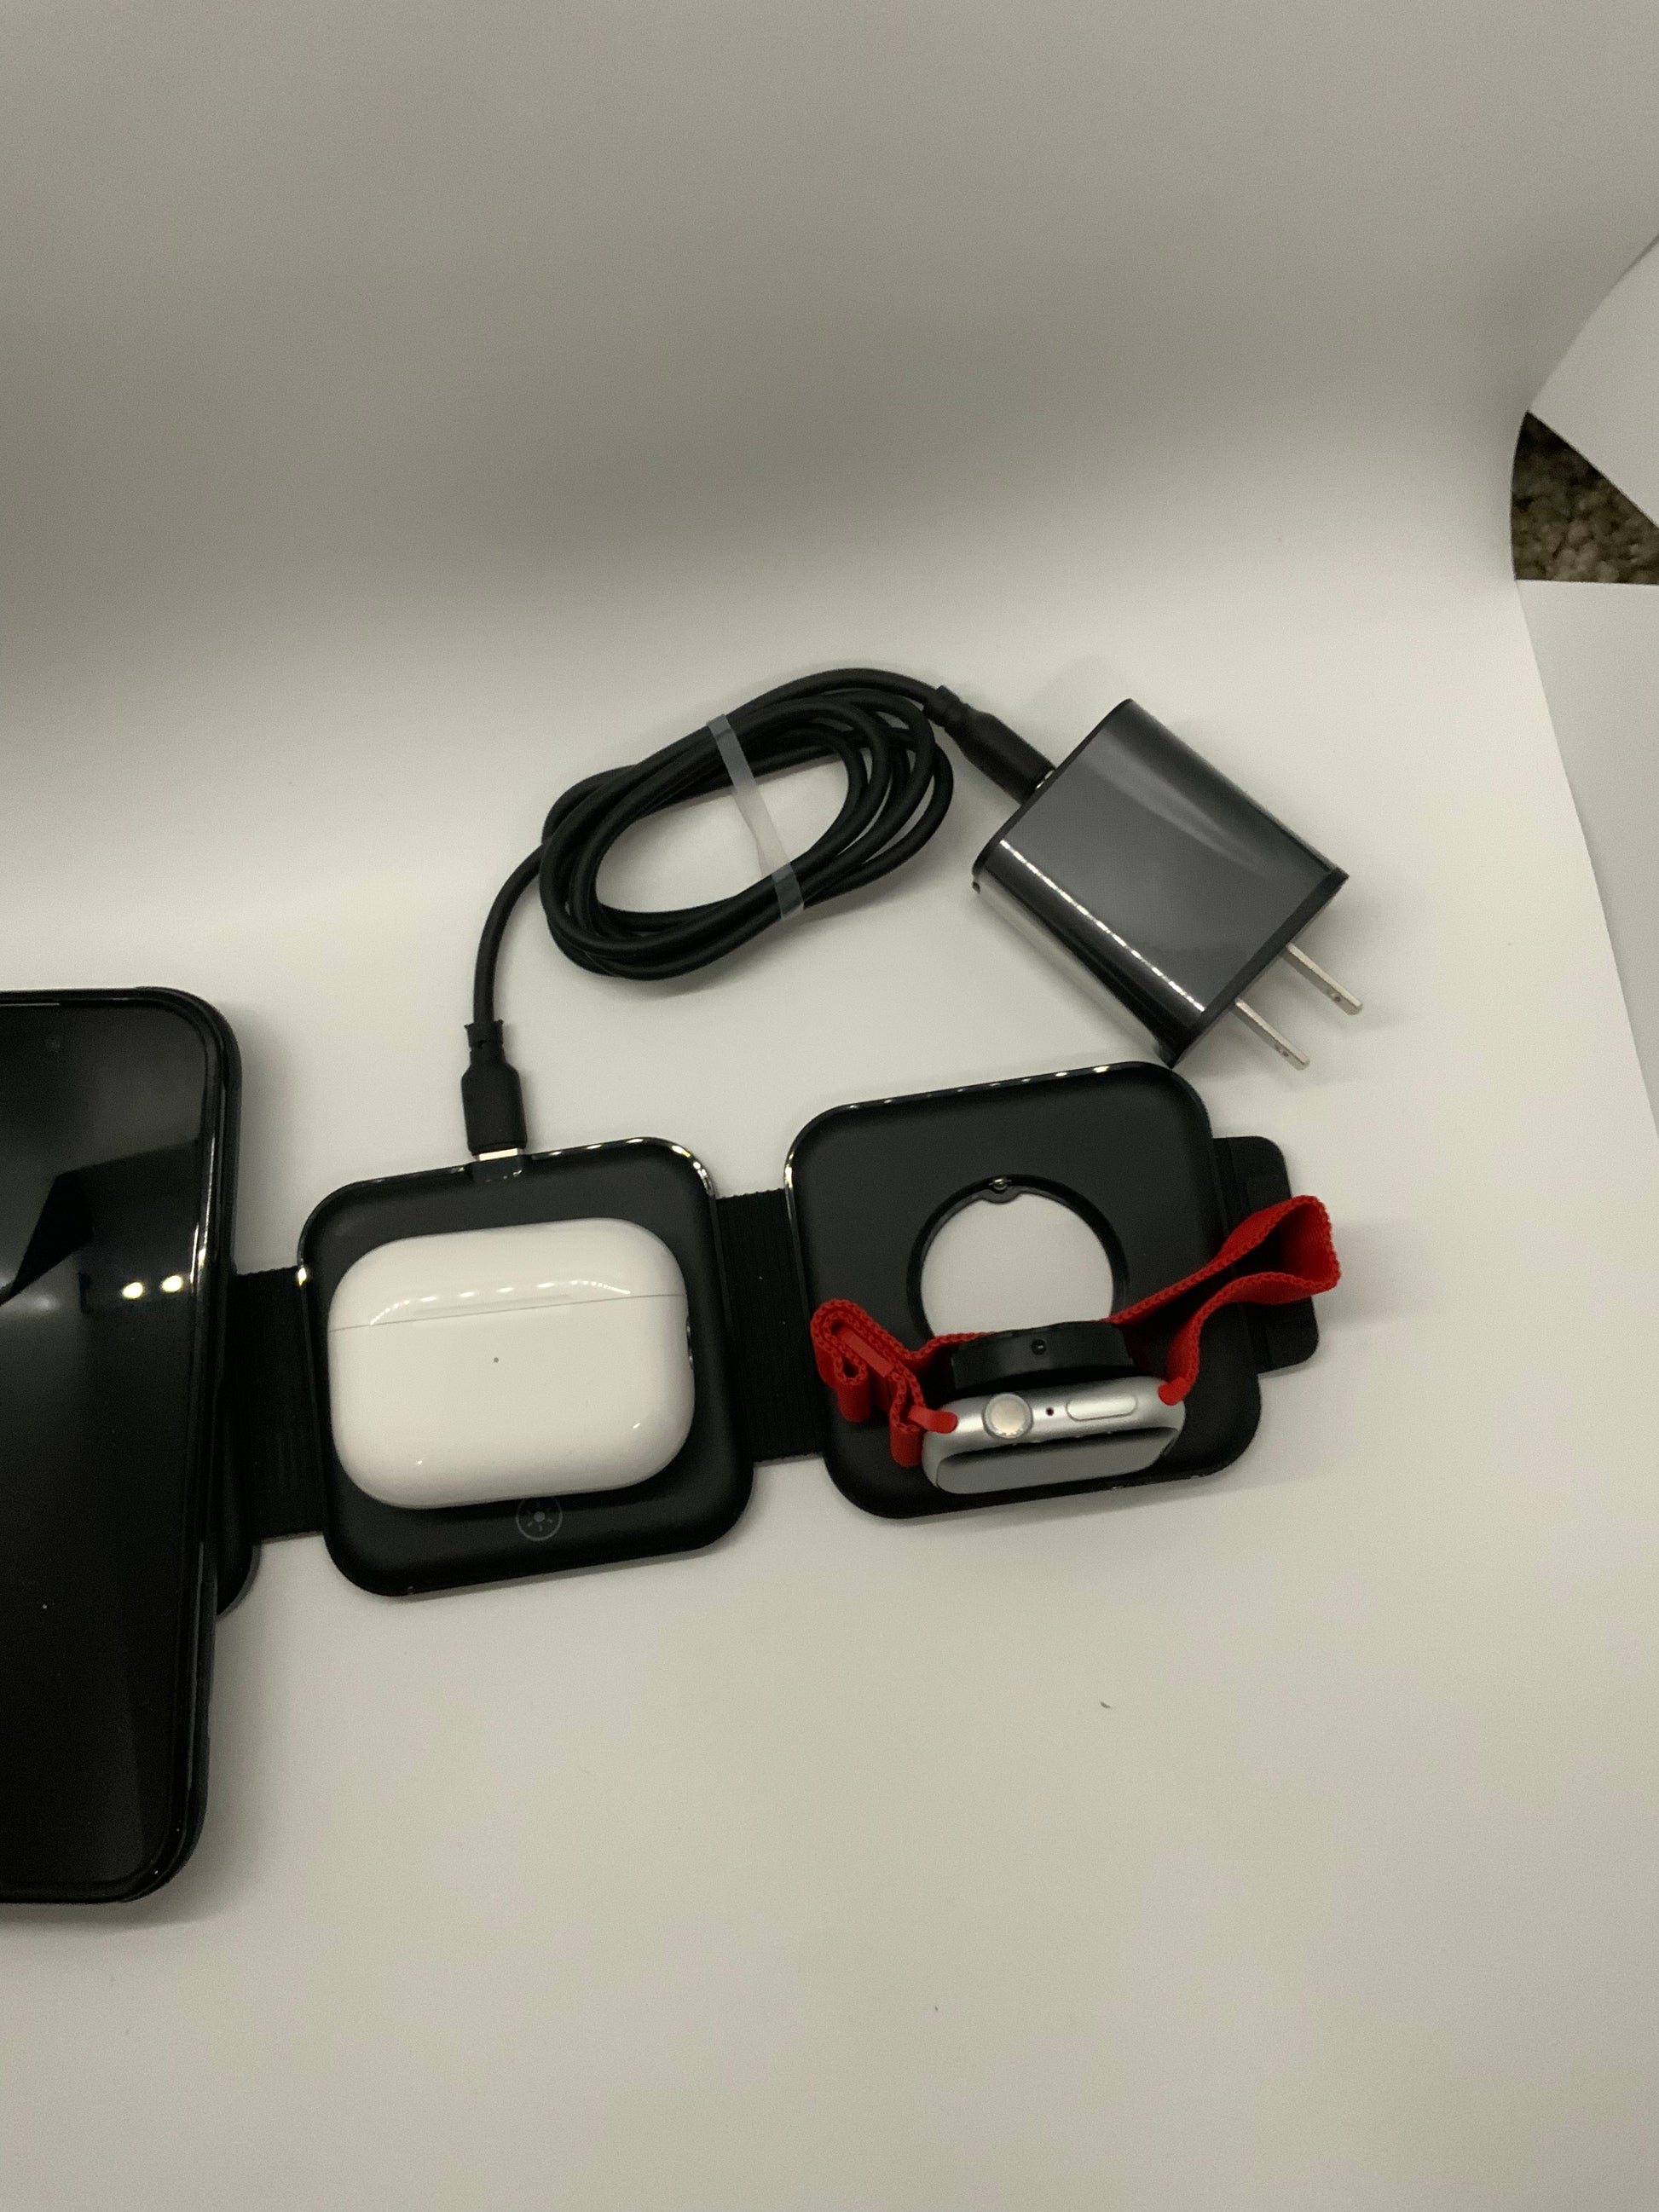 Be My AI: The picture shows several items placed on a white surface. From left to right:

1. There is a black smartphone with a reflective screen.
2. Next to the smartphone, there is a black square-shaped wireless charging pad with a white case on it that looks like it's for earbuds.
3. To the right of the charging pad, there is a smartwatch with a red woven band.
4. Above these items, there is a black cable coiled up with a silver charging block attached to it.

The background is plain white and there is a